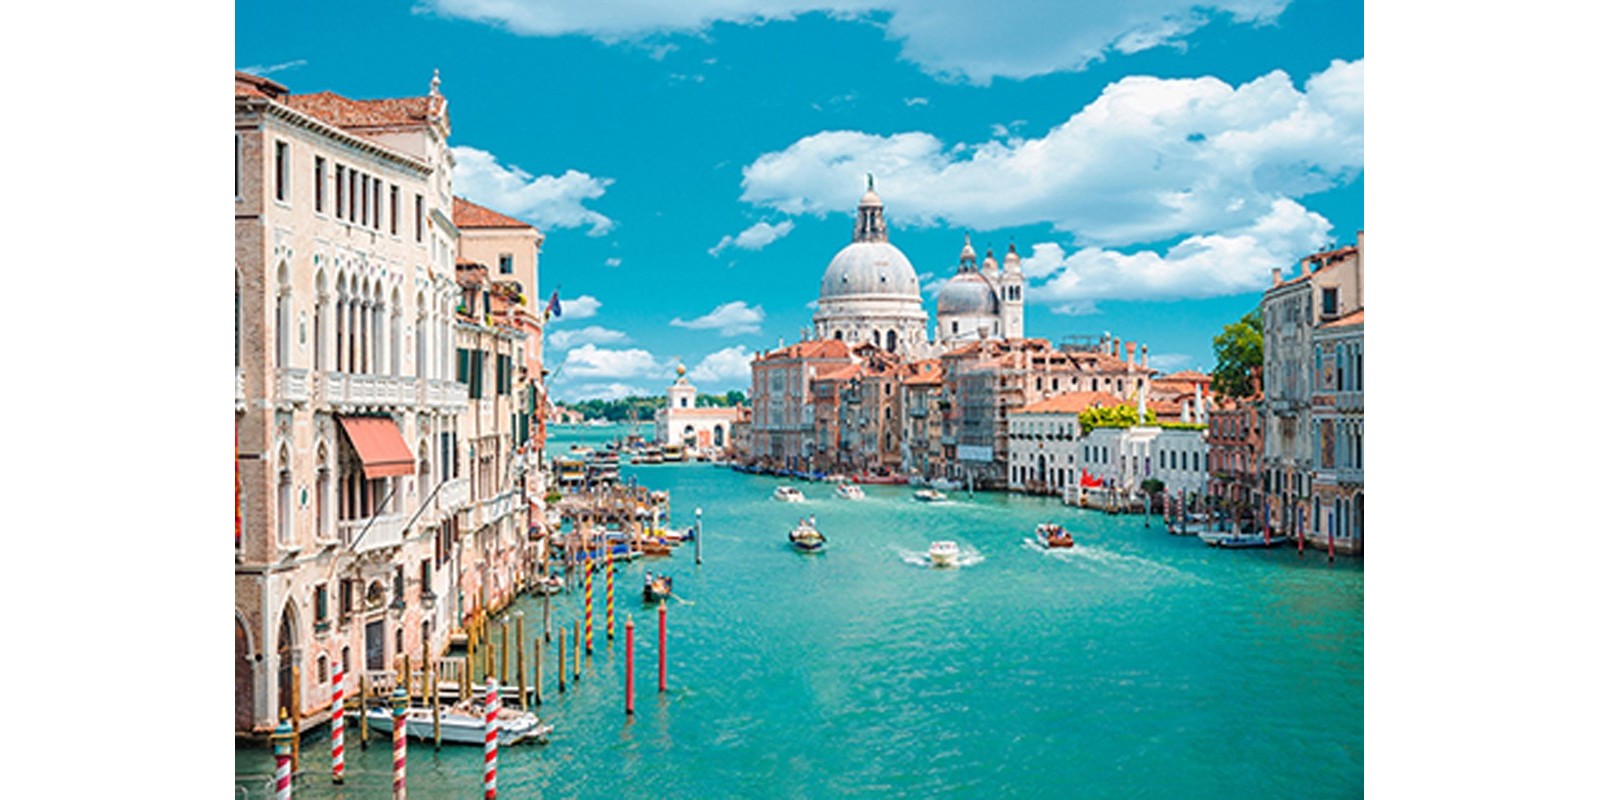 Pangea Images - The Grand Canal, Venice